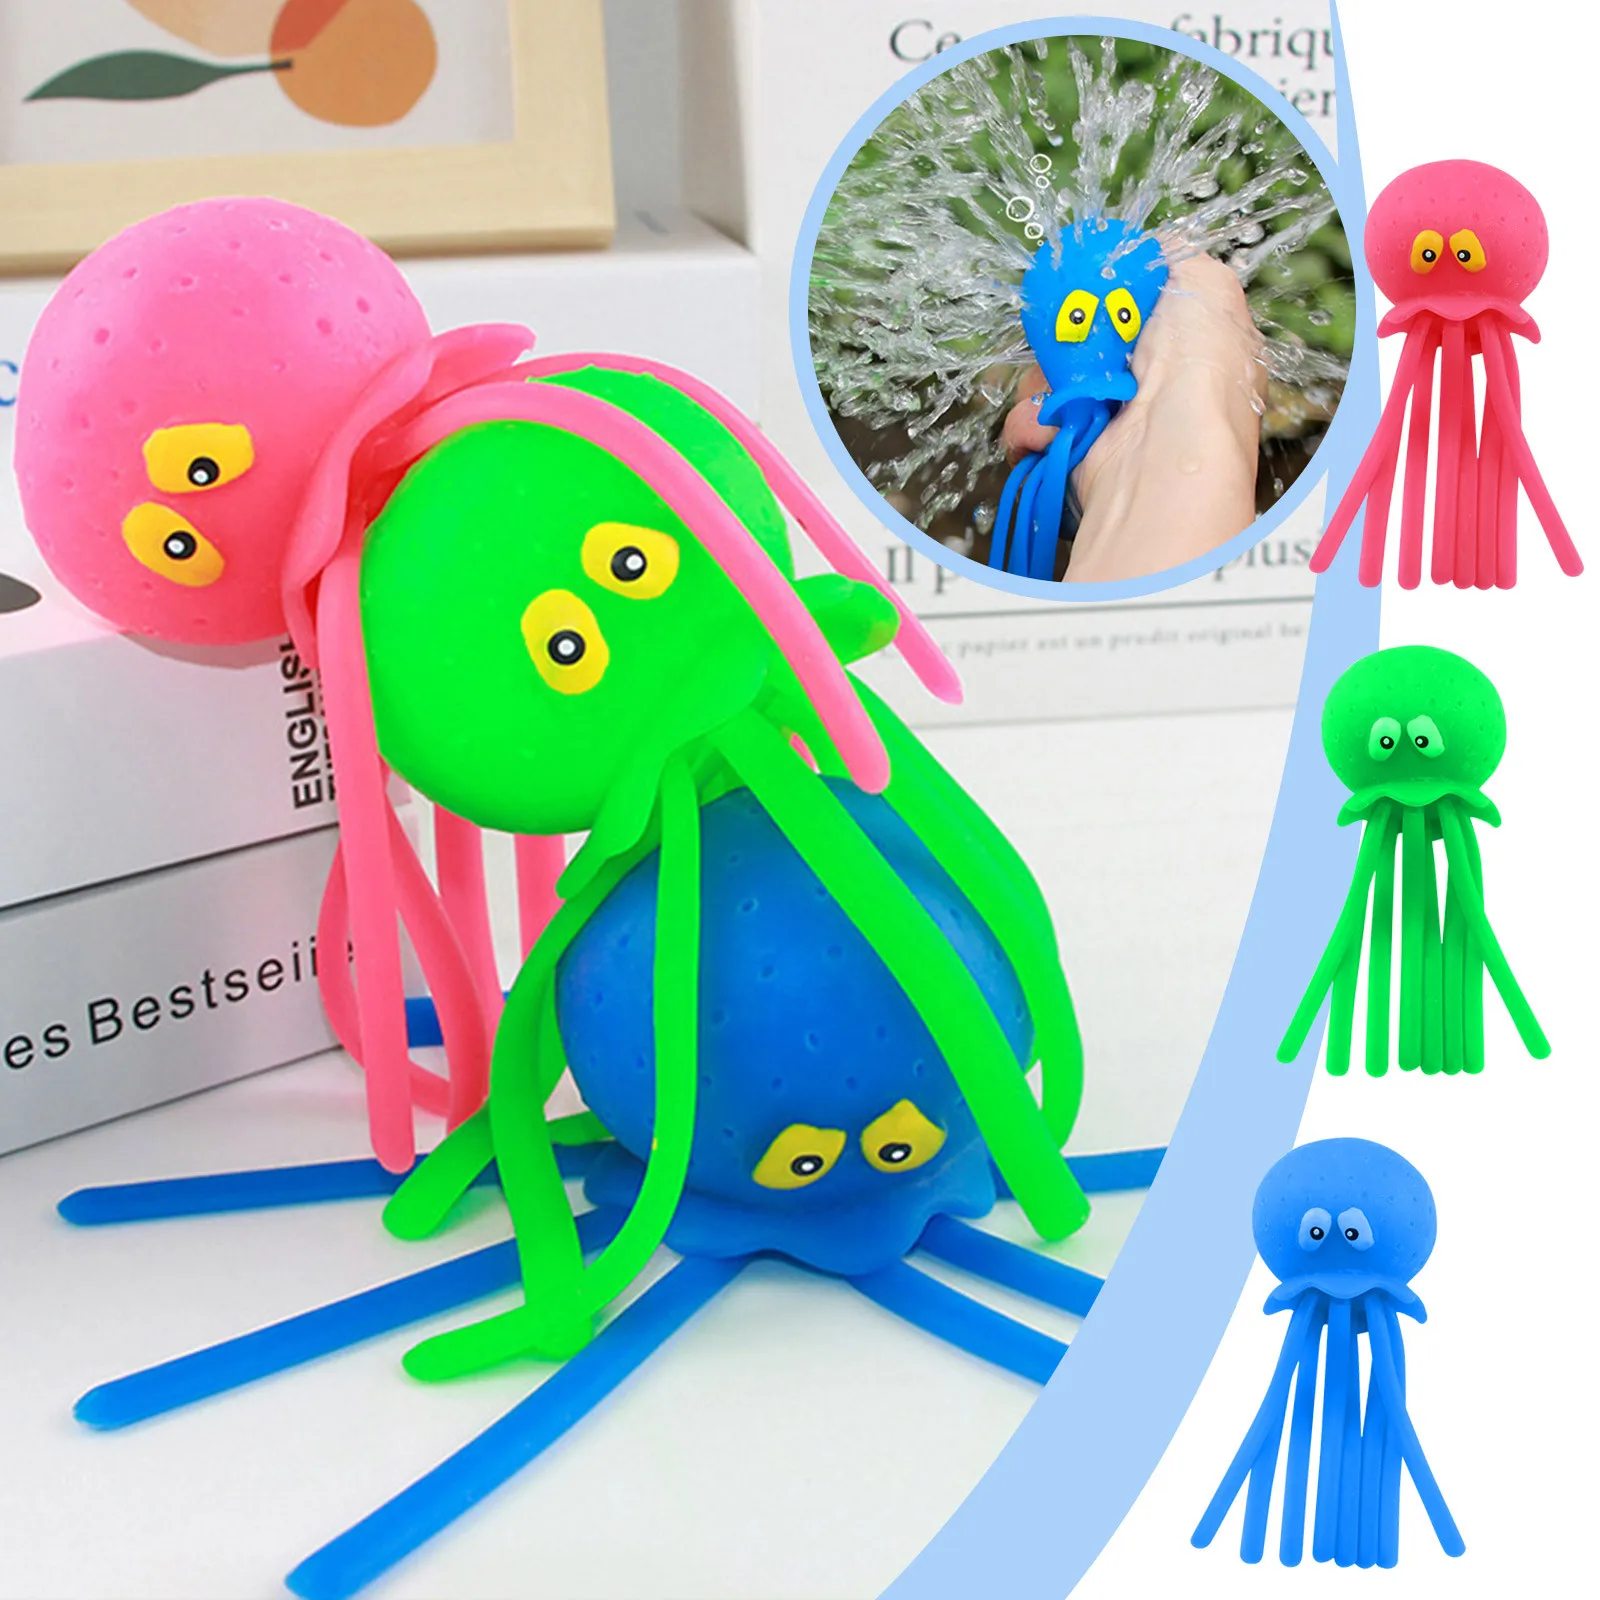 

Octopus Water Ball Bulk Rubber Octopus Bath Toys For Party Favors Sensory Stress Relief Pool Toy For Gifts Sea Animal Goodie Bag